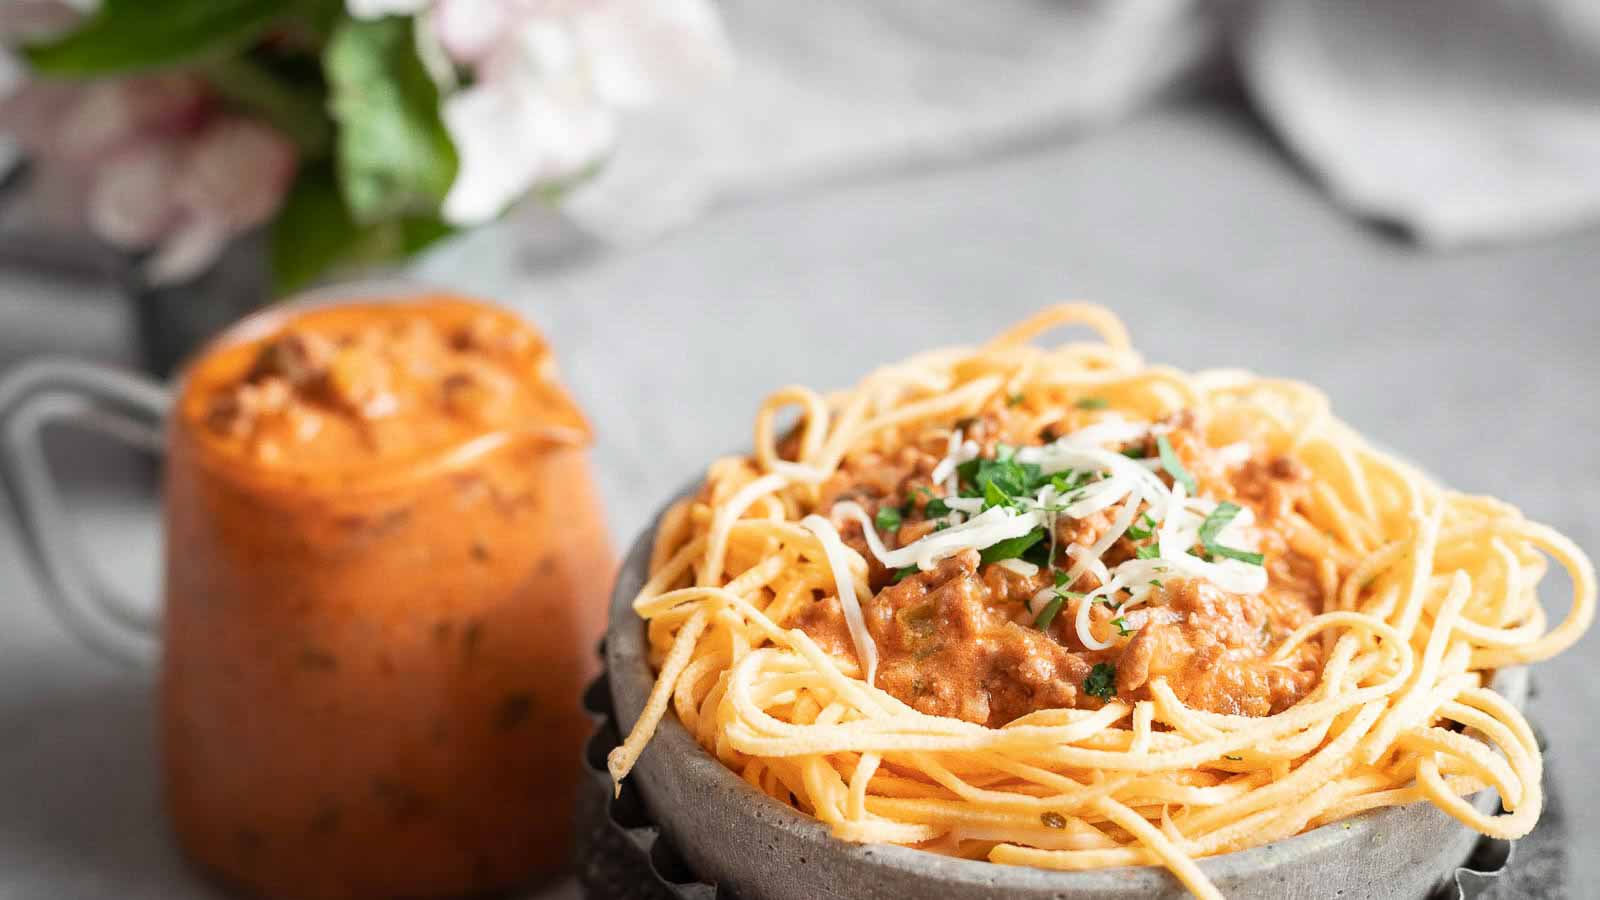 Spaghetti with meat sauce in a bowl.